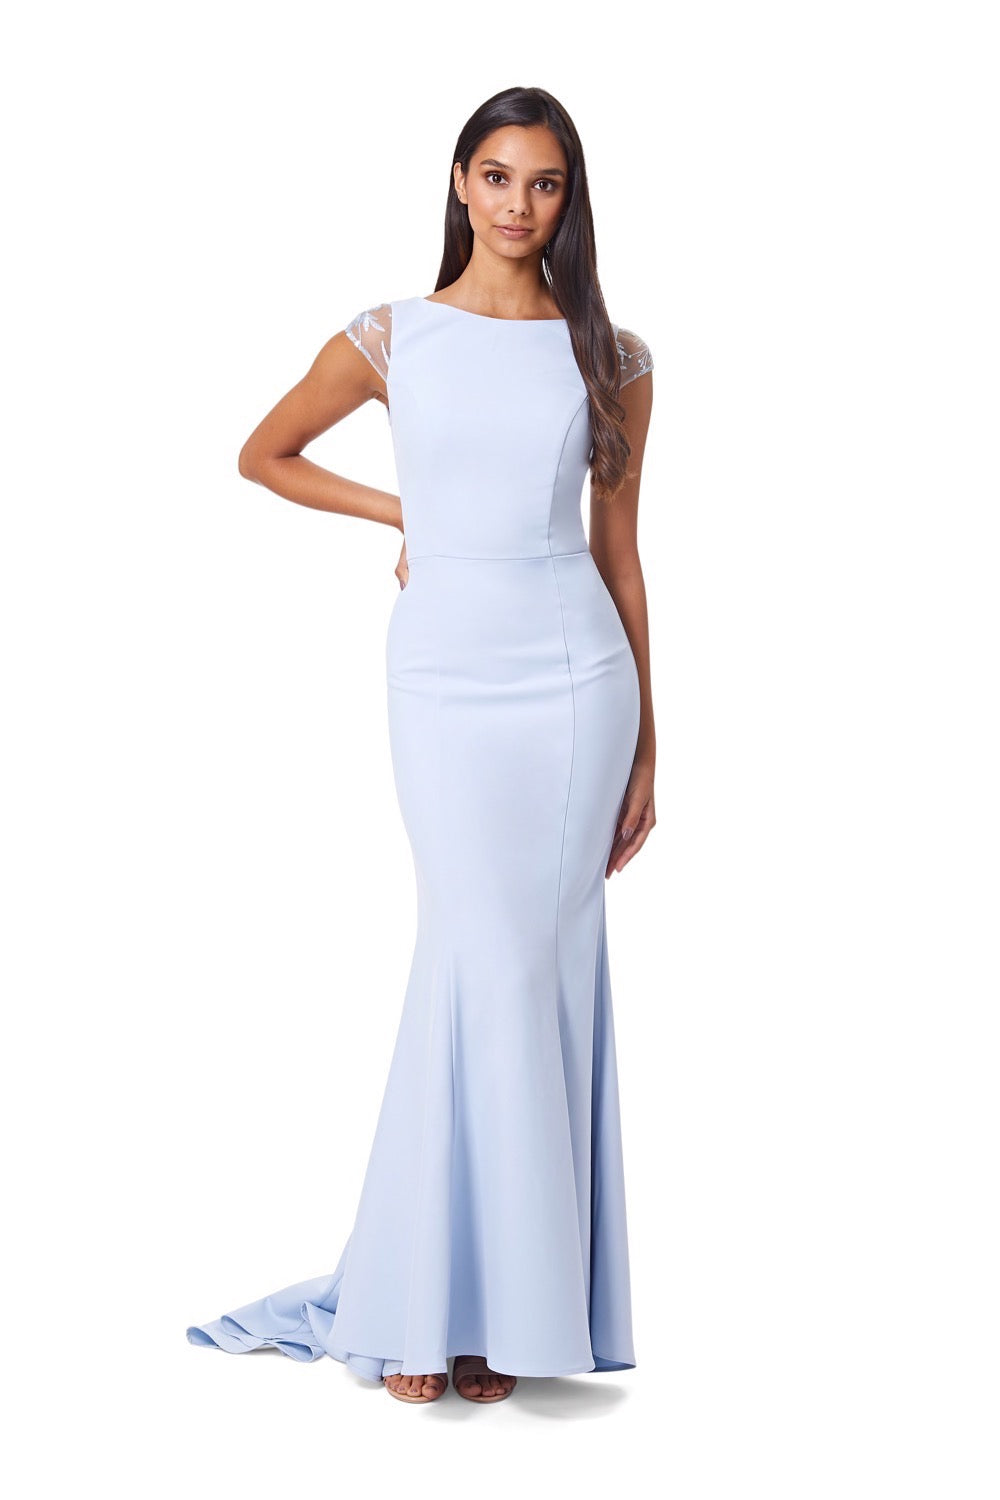 Masa Fishtail Maxi Dress with Lace Cap Sleeves and Embroidered Button Back, UK 10 / US 6 / EU 38 / Powder Blue